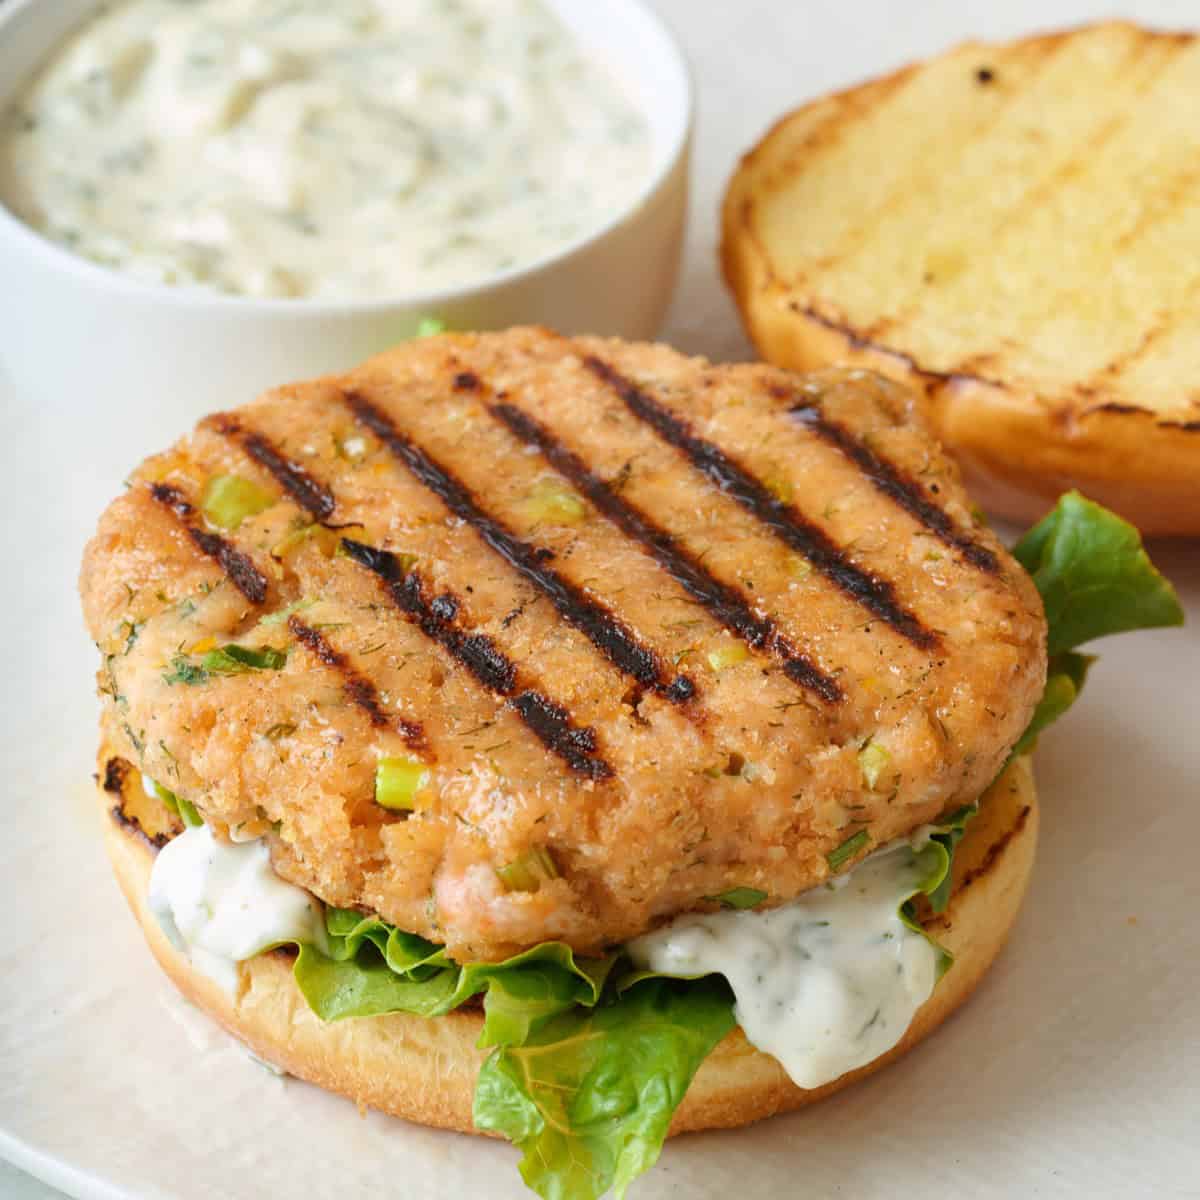 Grilled salmon burger patty on a bun with toppings.